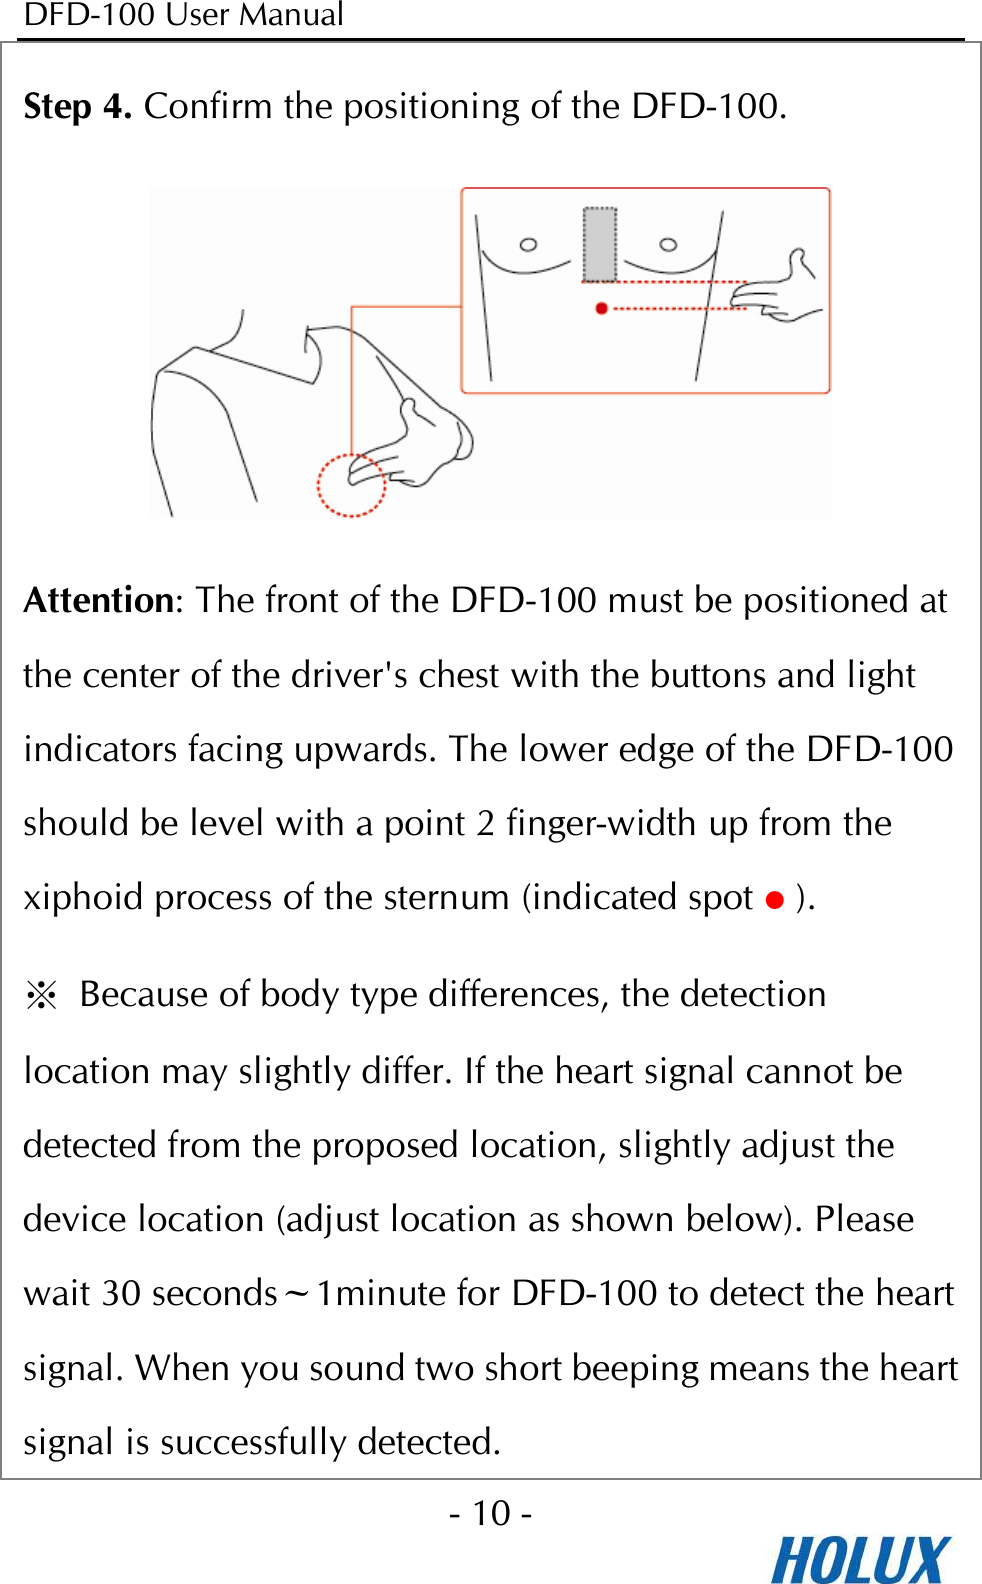 DFD-100 User Manual - 10 -  Step 4. Confirm the positioning of the DFD-100.  Attention: The front of the DFD-100 must be positioned at the center of the driver&apos;s chest with the buttons and light indicators facing upwards. The lower edge of the DFD-100 should be level with a point 2 finger-width up from the xiphoid process of the sternum (indicated spot  ). ※  Because of body type differences, the detection location may slightly differ. If the heart signal cannot be detected from the proposed location, slightly adjust the device location (adjust location as shown below). Please wait 30 seconds~1minute for DFD-100 to detect the heart signal. When you sound two short beeping means the heart signal is successfully detected. 